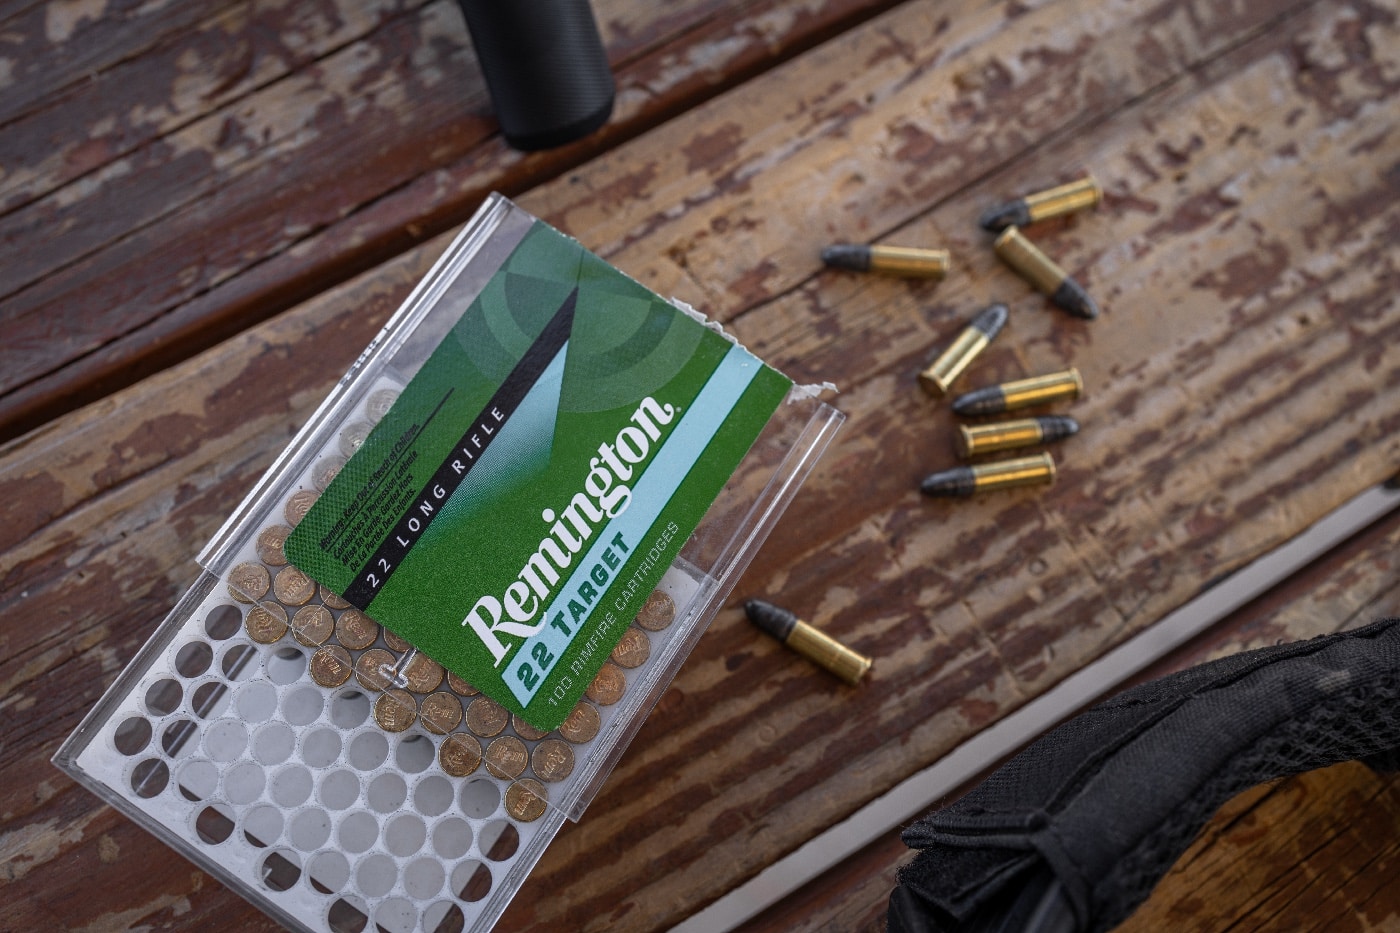 Remington ammo used for accuracy testing the Springfield Model 2020 Rimfire Target color variants